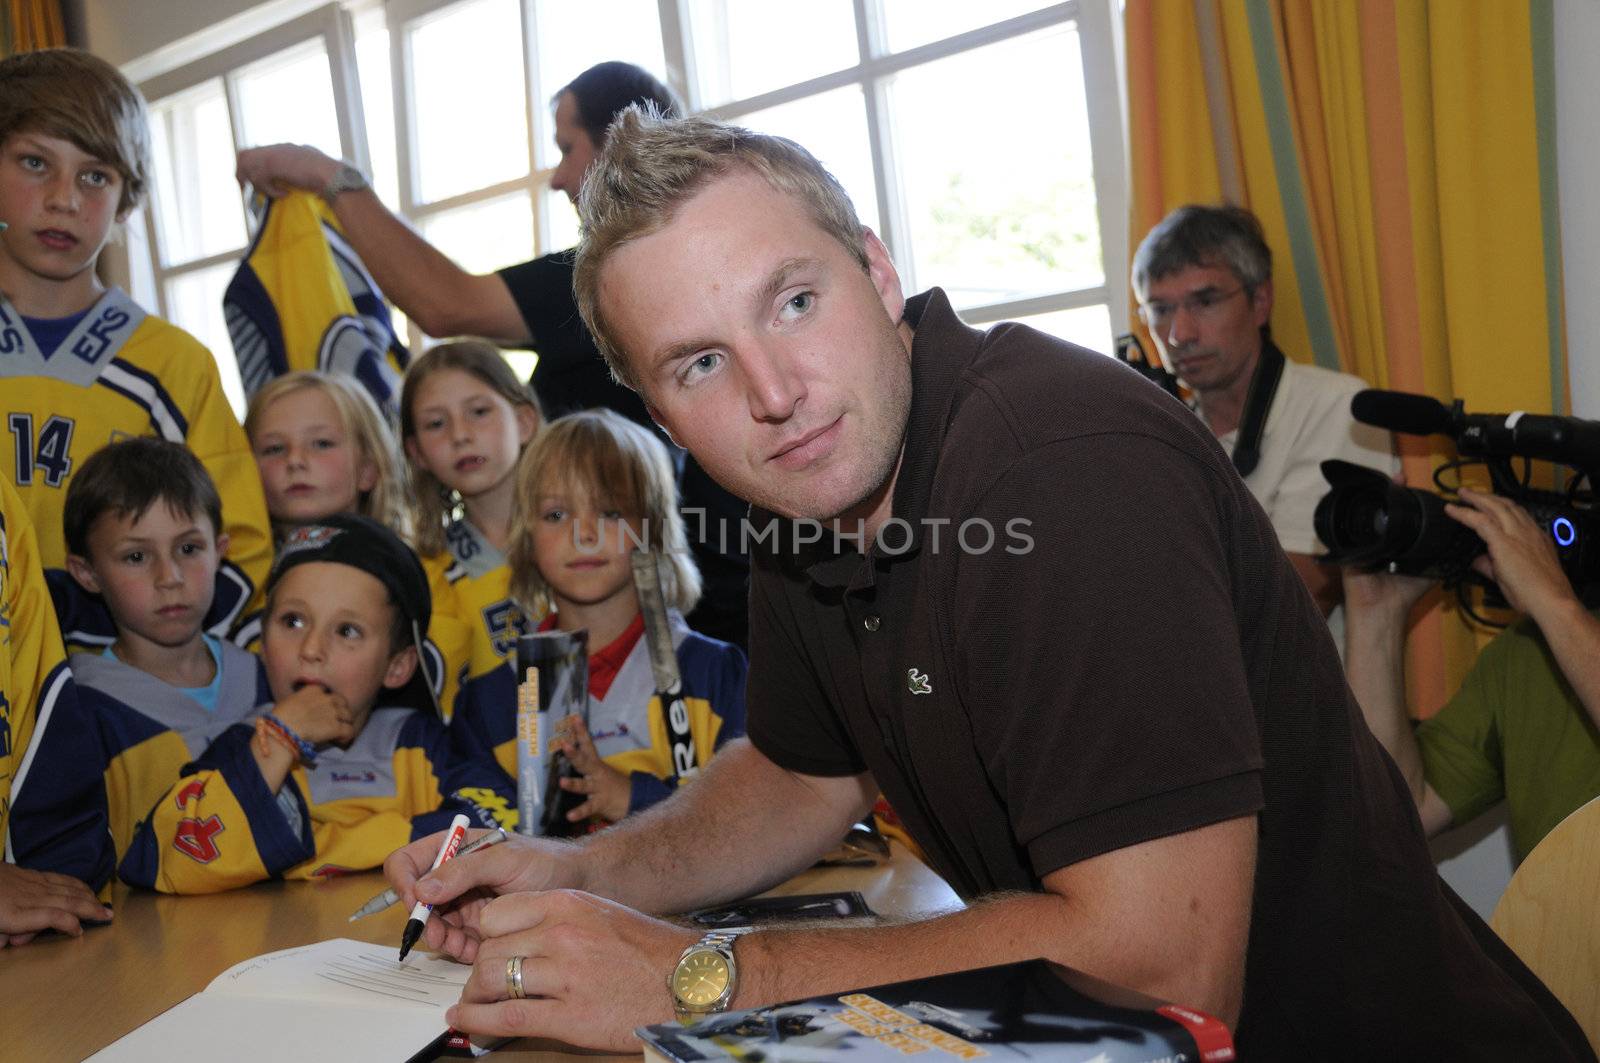 Zell am See, Austria - Jul 8. NHL star player Thomas Vanek visits his hometown Zell am See in Austria on 8th July 2010, to speak to young players of the hockey club Zell am See and giving autographs.